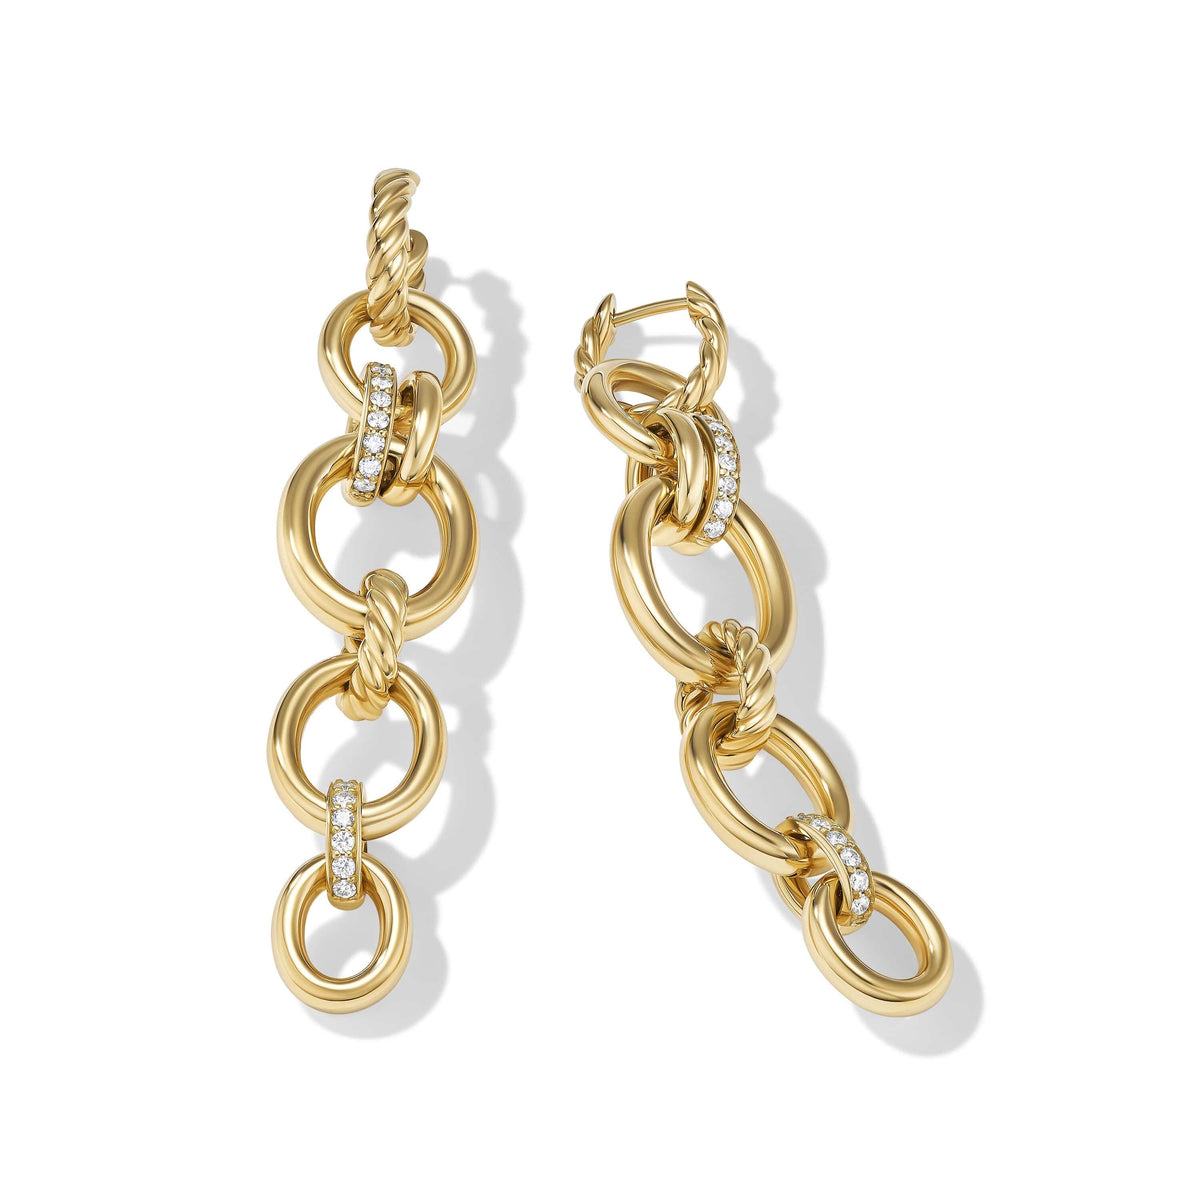 DY Mercer™ Linked Drop Earrings in 18K Yellow Gold with Pavé Diamonds